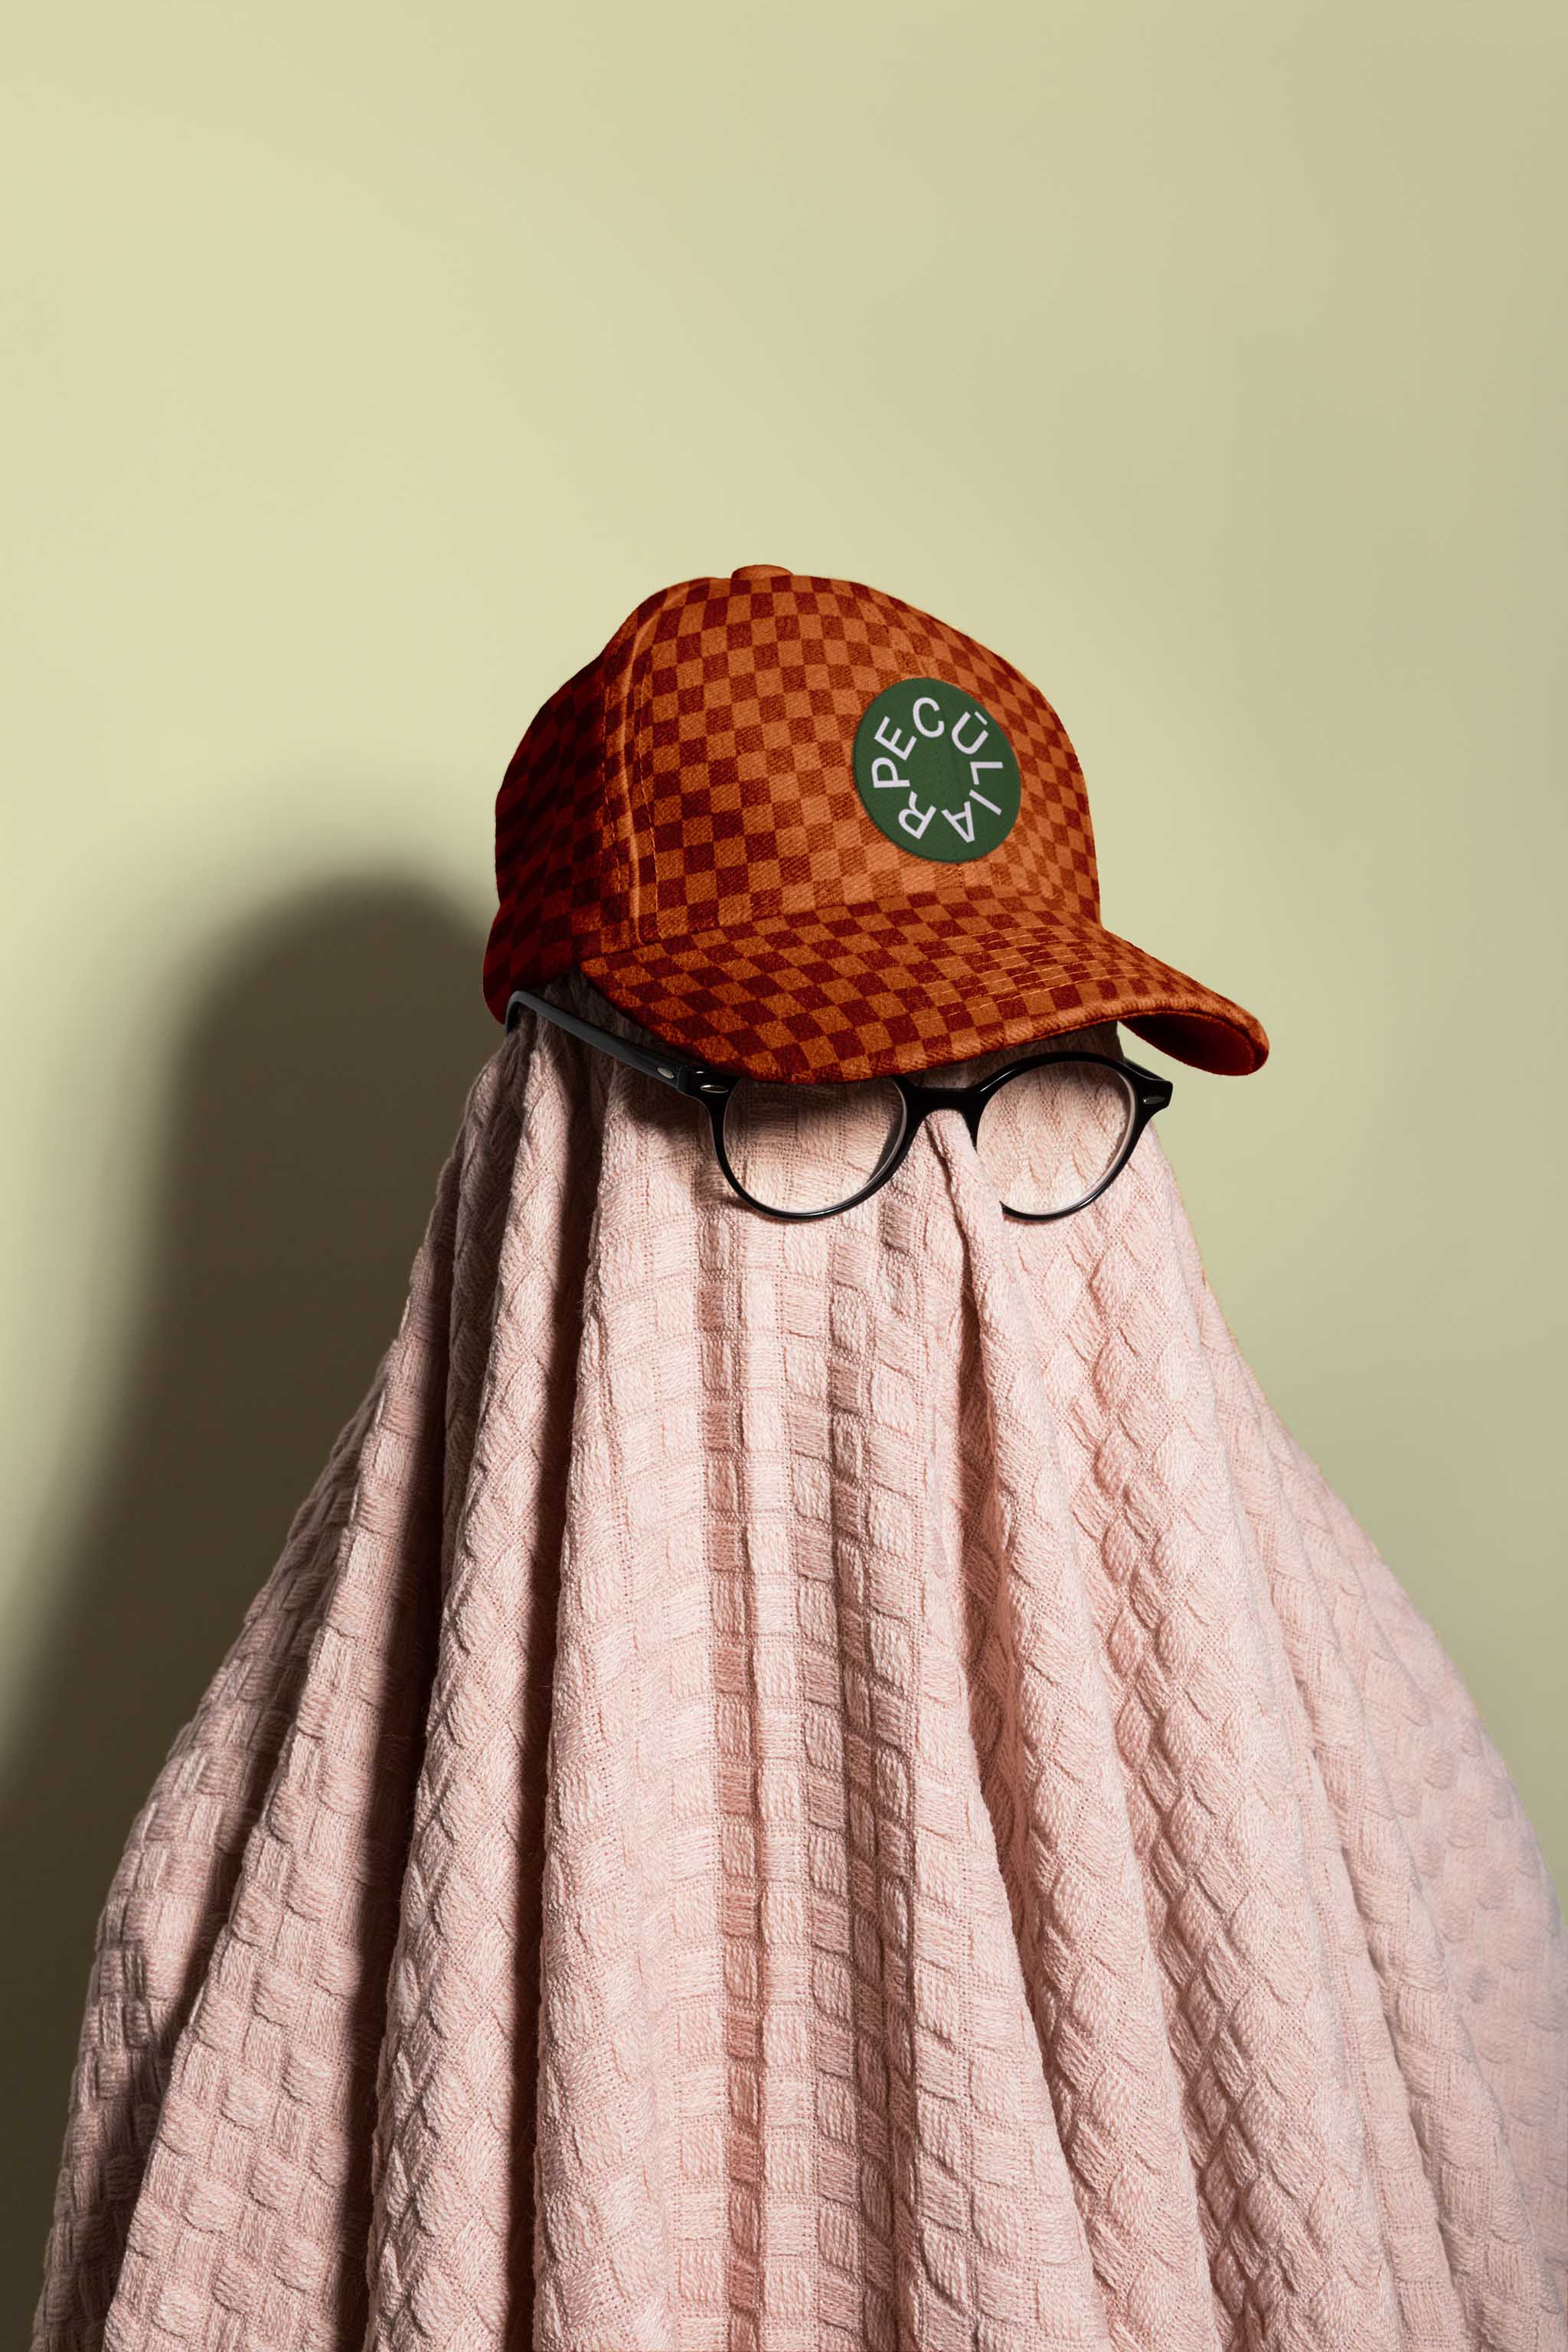 Mockup of a covered person with eyeglasses and a baseball hat on a studio background, in use example.